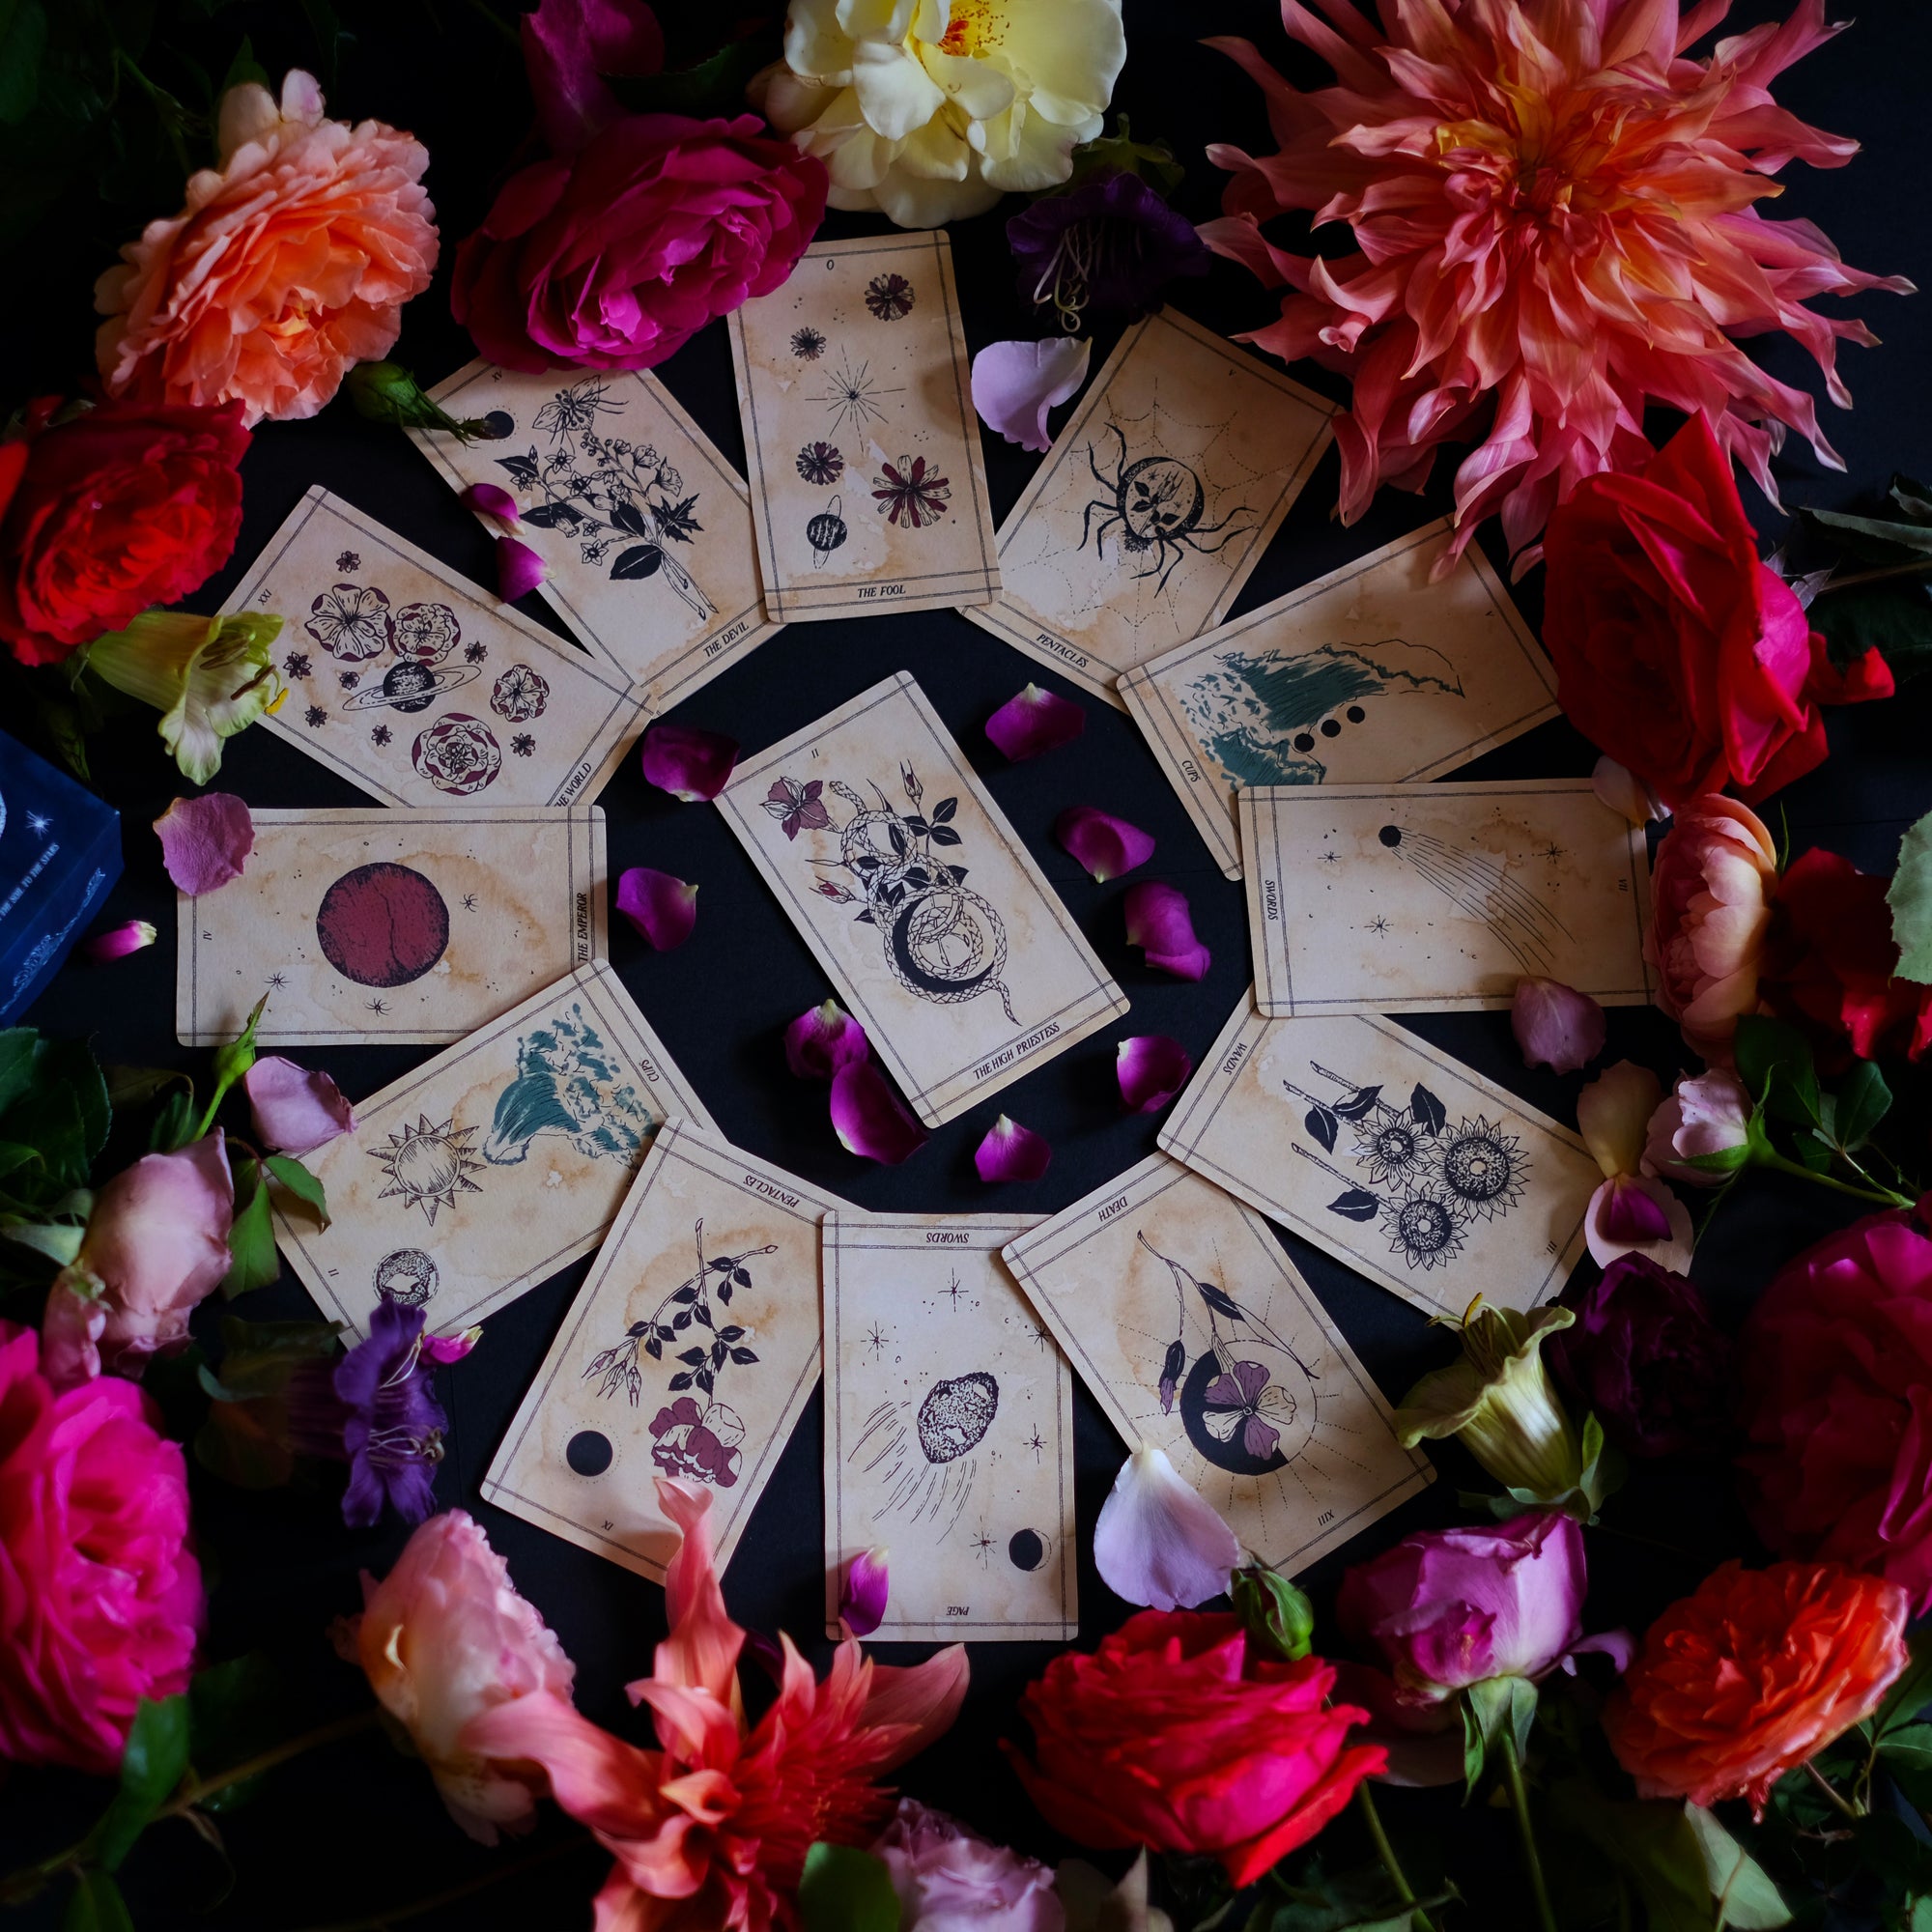 Ad Orbita is a botanical and astrology tarot deck, illustrarted by hand and independently made.